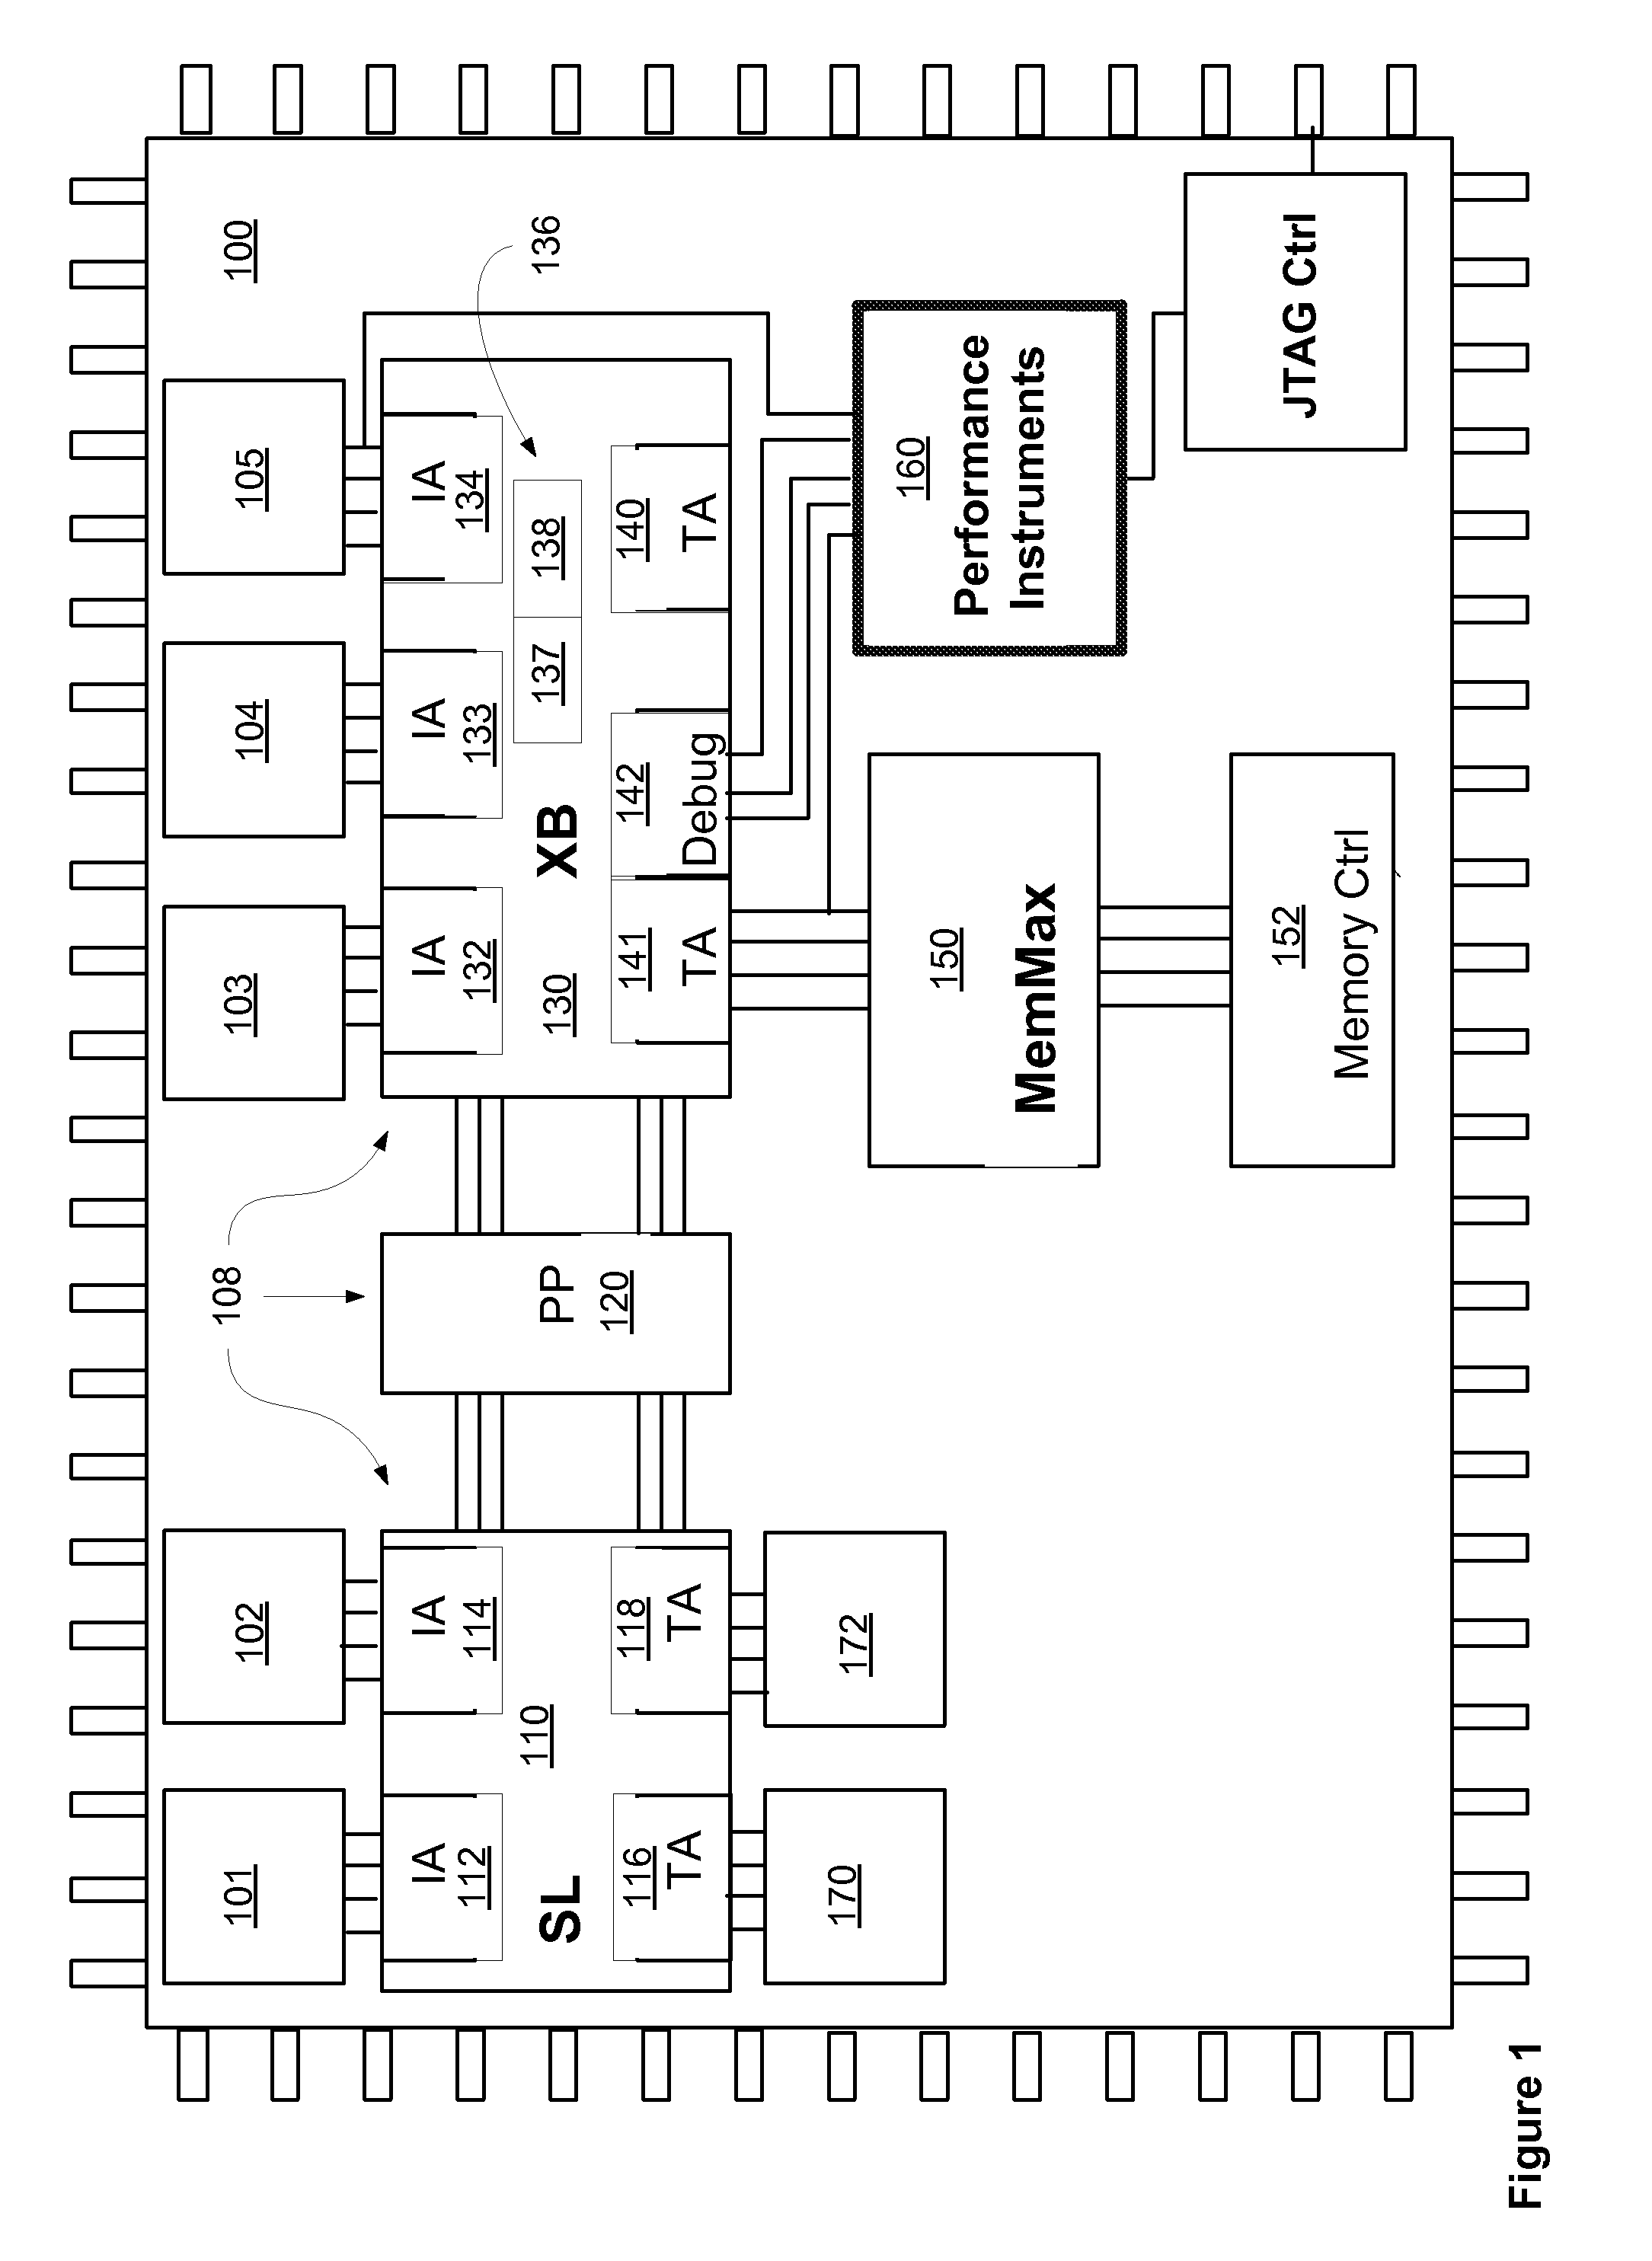 Method and system to monitor, debug, and analyze performance of an electronic design